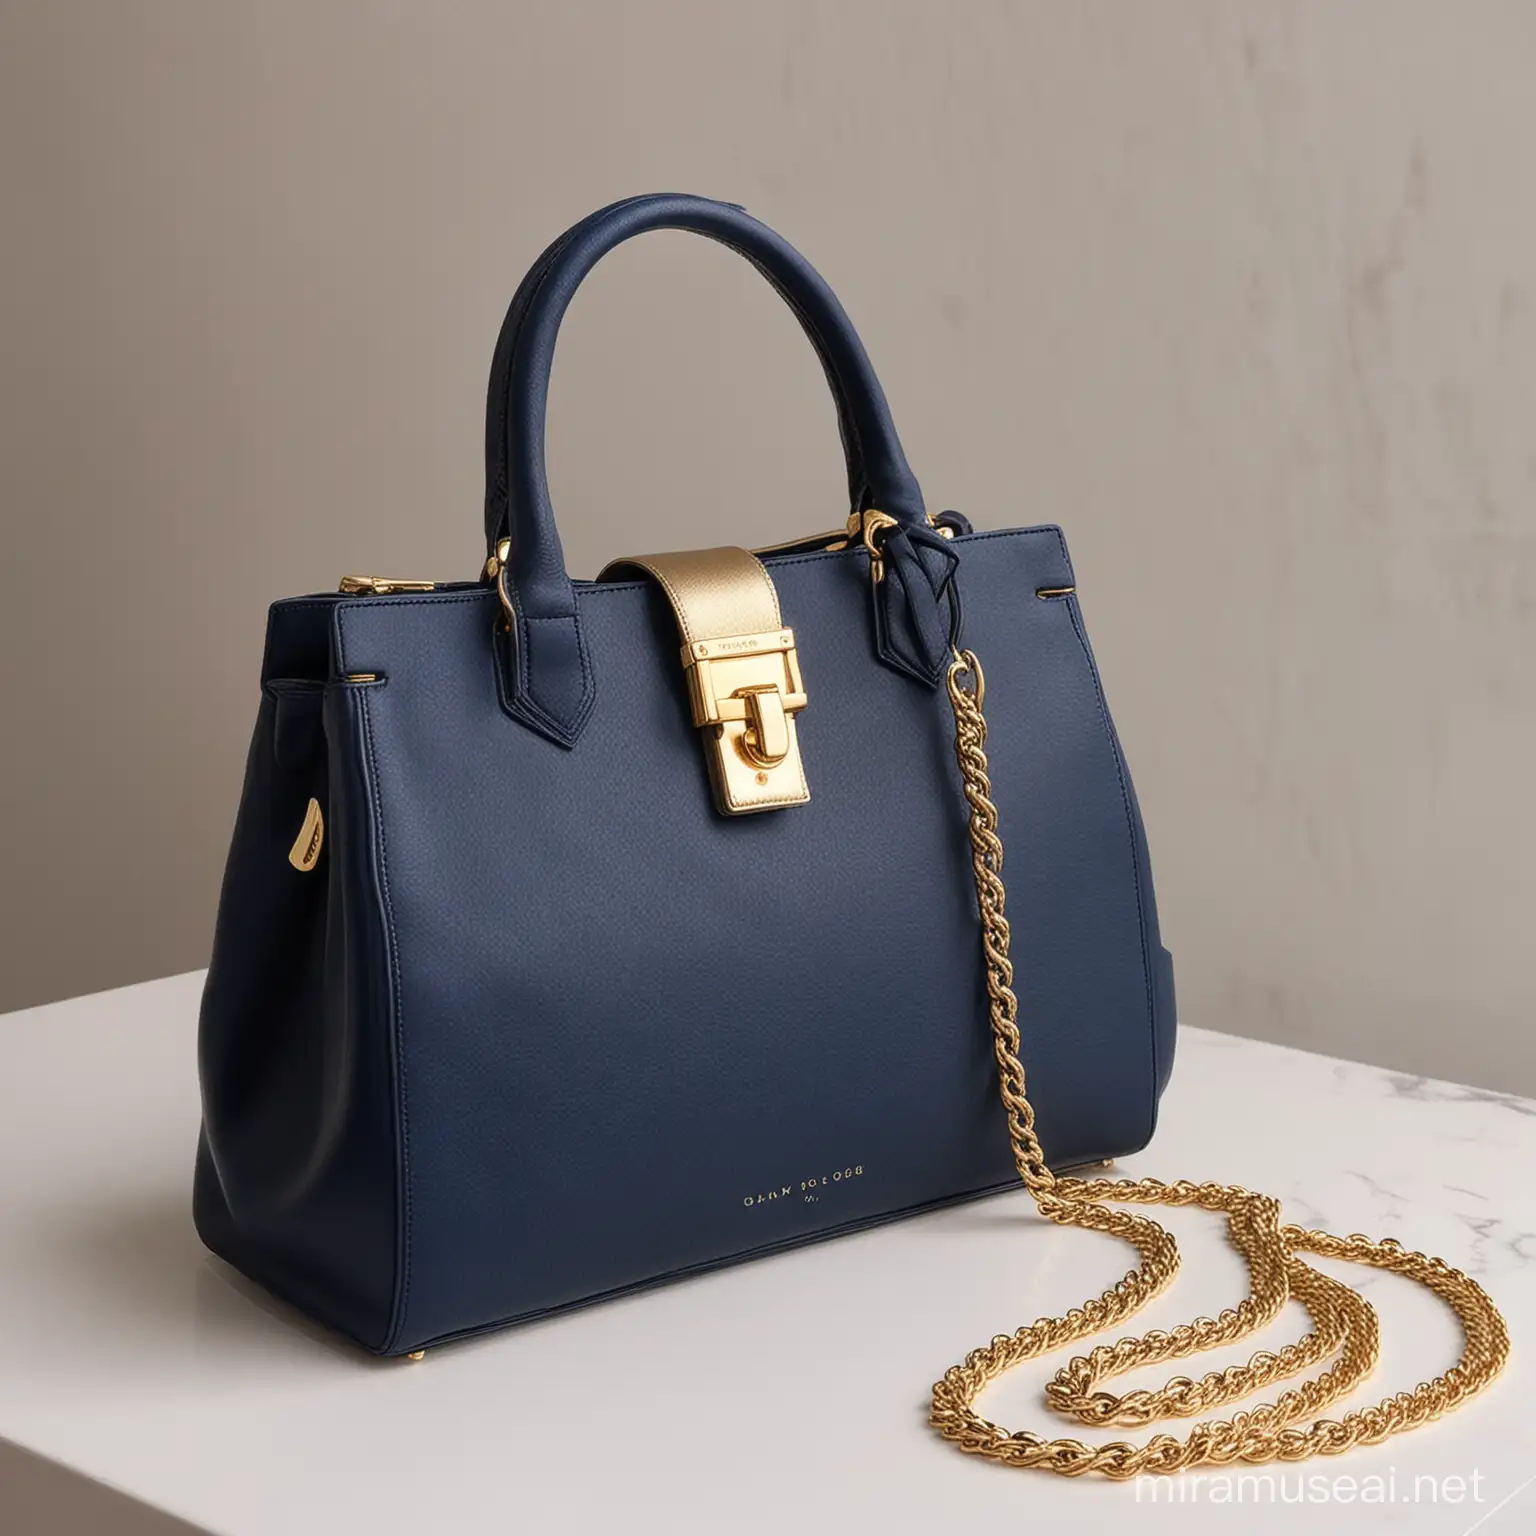  classy and elegant luxury accessories brand Navy blue and Gold bag